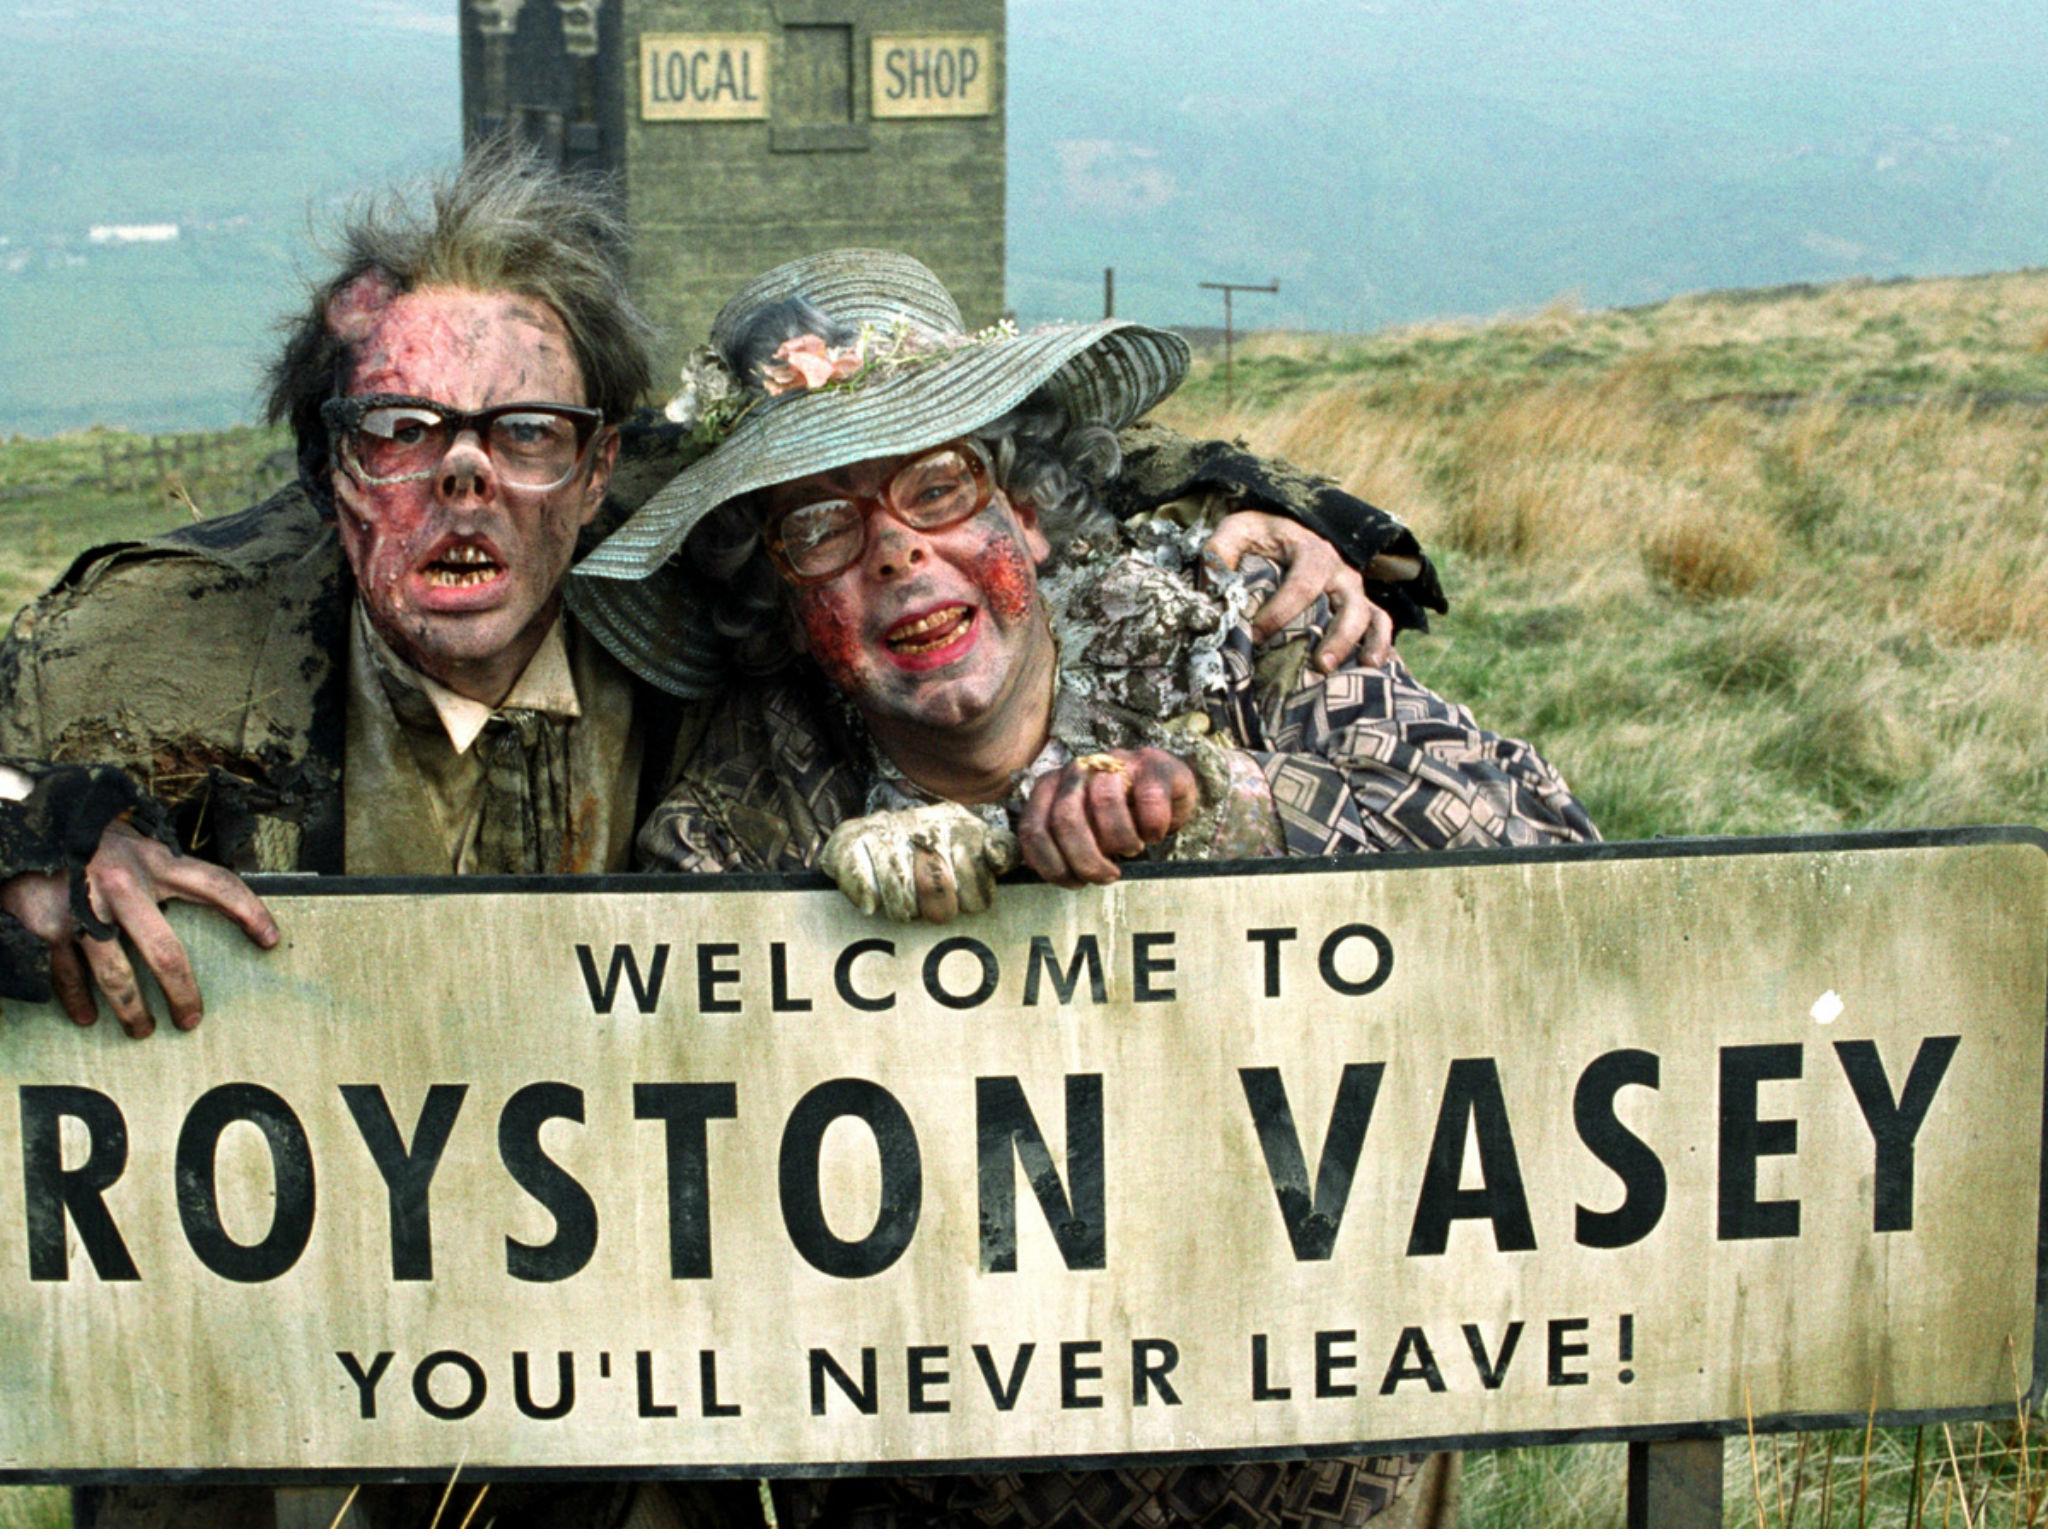 British TV shows including BBC2’s ‘The League of Gentlemen’ owe a debt of some kind to David Lynch’s unique vision